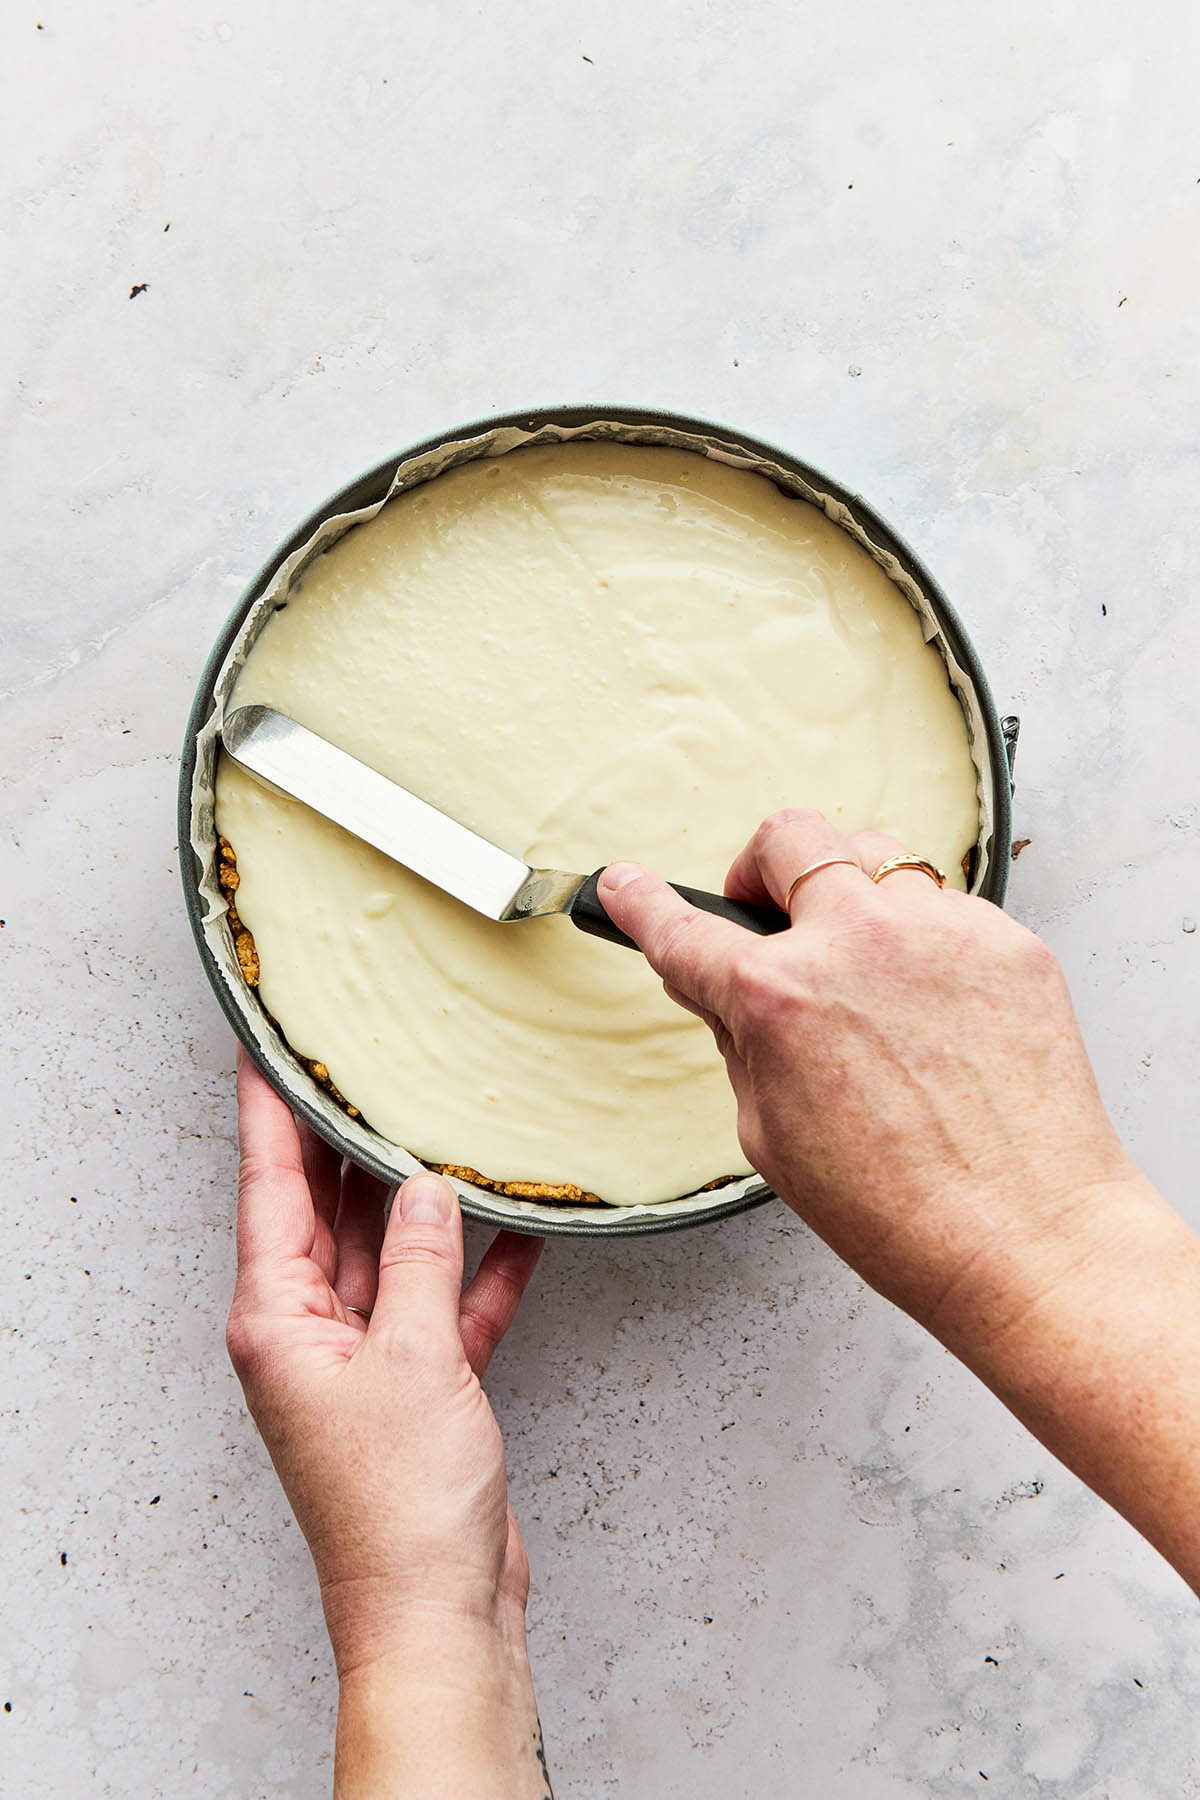 A hand using a small offset aptula to smooth cheesecake filling in a tin.